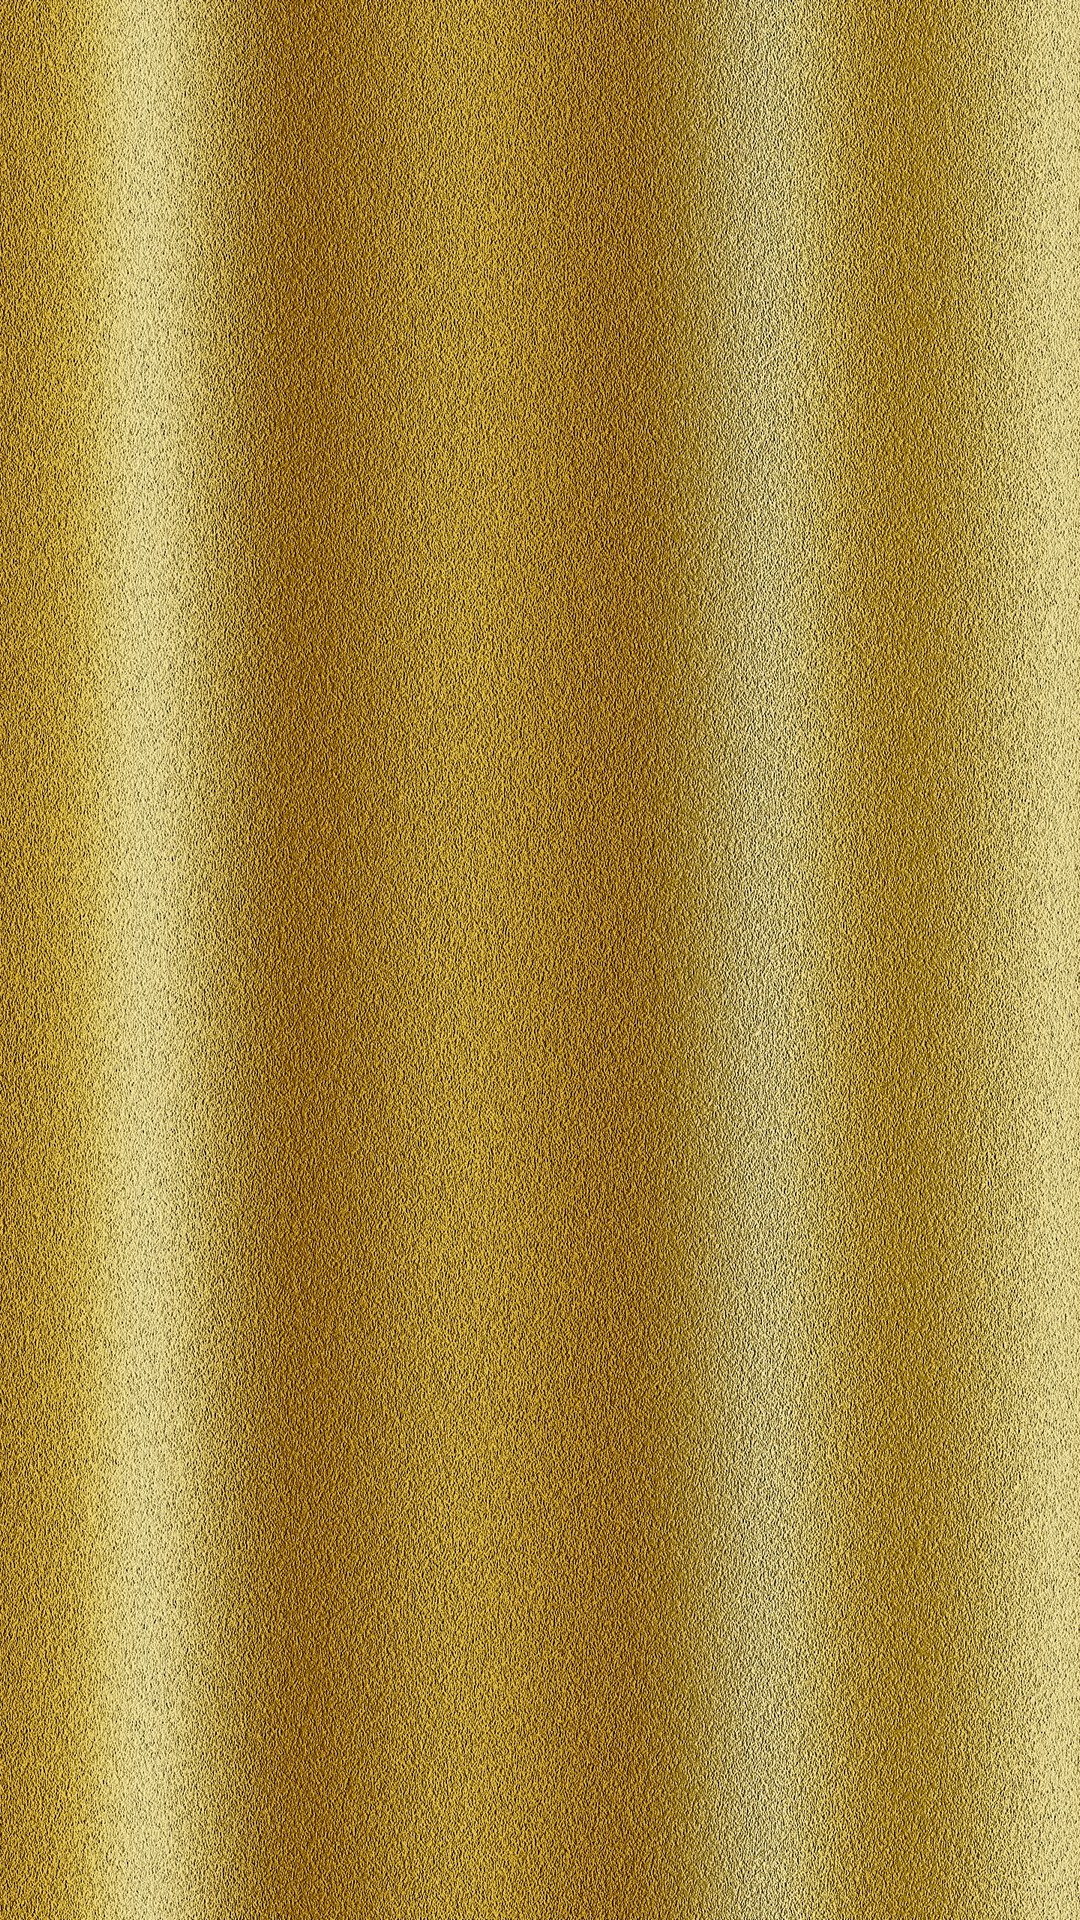 Metallic Gold Android Wallpaper With Hd Resolution - Walpaper Gold For Android - HD Wallpaper 